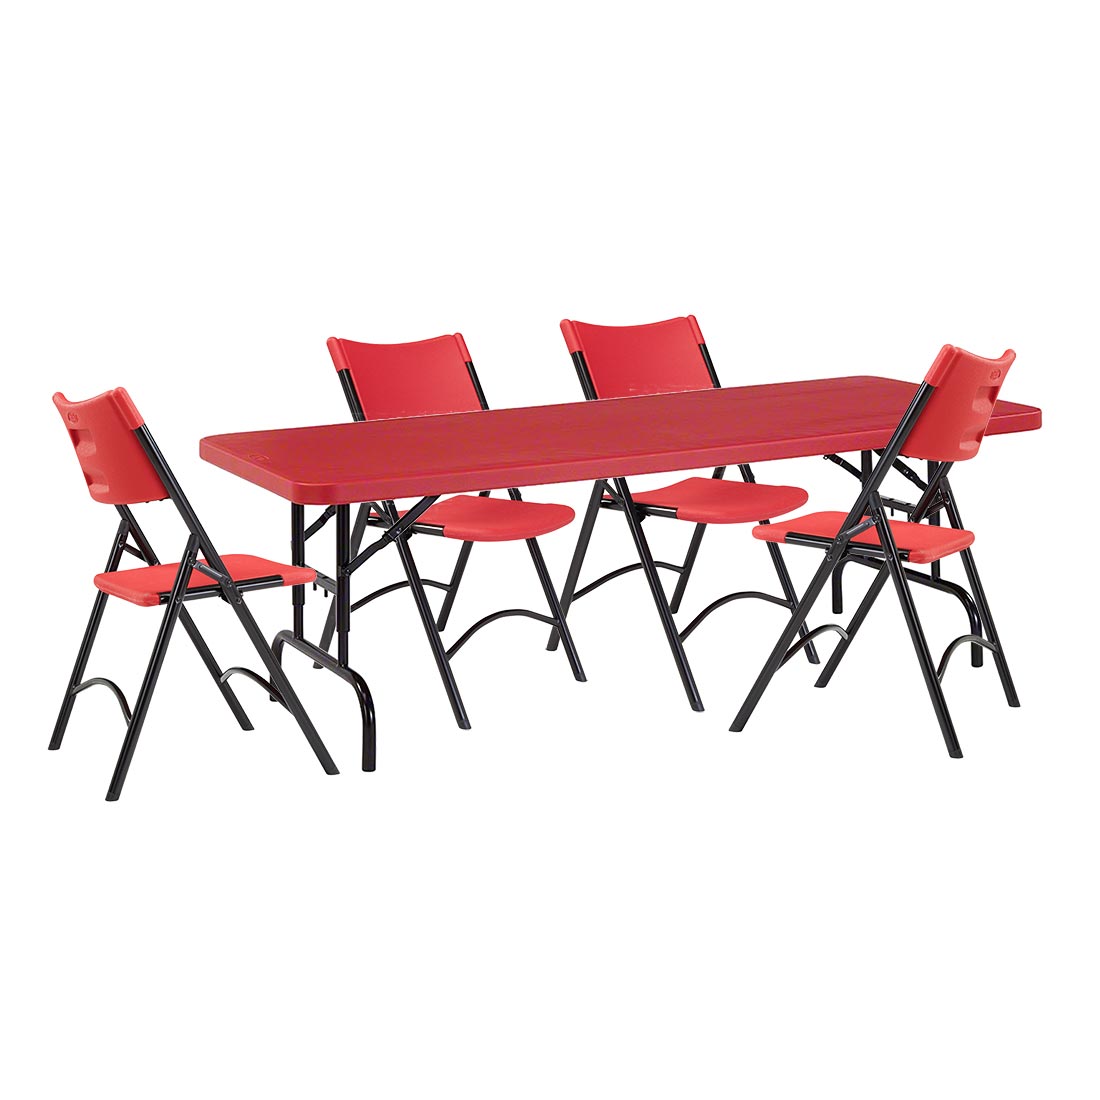 NPS® 30"x72" Folding Table & Chairs Package, Red StageDrop